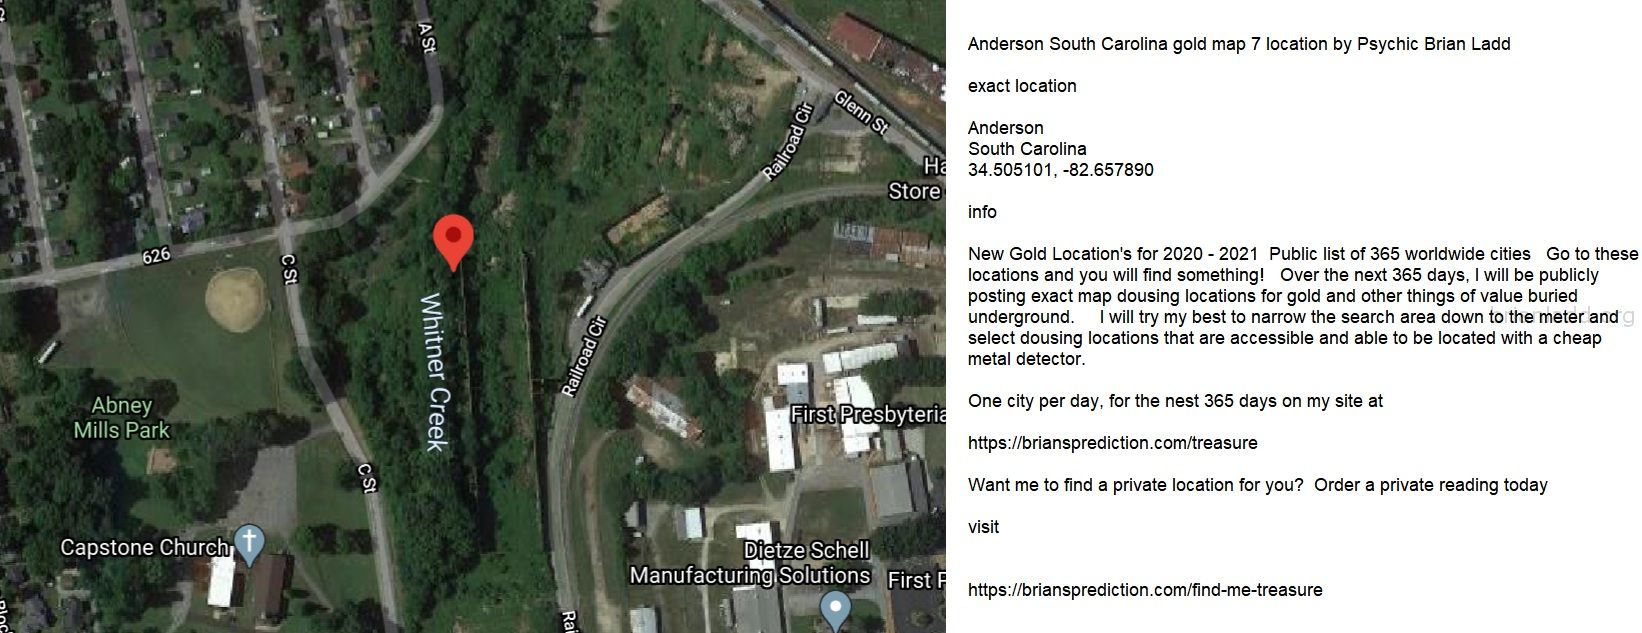 Anderson South Carolina Gold Map 7 Location By Psychic Brian Ladd - Anderson South Carolina Gold Map 7 Location By Psych...
Anderson South Carolina Gold Map 7 Location By Psychic Brian Ladd  Exact Location  Anderson  South Carolina  34.505101, -82.657890  Info  New Gold Location'S For 2020 - 2021  Public List Of 365 Worldwide Cities  Go To These Locations And You Will Find Something!  Over The Next 365 Days, I Will Be Publicly Posting Exact Map Dousing Locations For Gold And Other Things Of Value Buried Underground.  I Will Try My Best To Narrow The Search Area Down To The Meter And Select Dousing Locations That Are Accessible And Able To Be Located With A Cheap Metal Detector.  One City Per Day, For The Nest 365 Days On My Site At   https://briansprediction.com/Treasure  Want Me To Find A Private Location For You?  Order A Private Reading Today  Visit   https://briansprediction.com/Find-Me-Treasure
